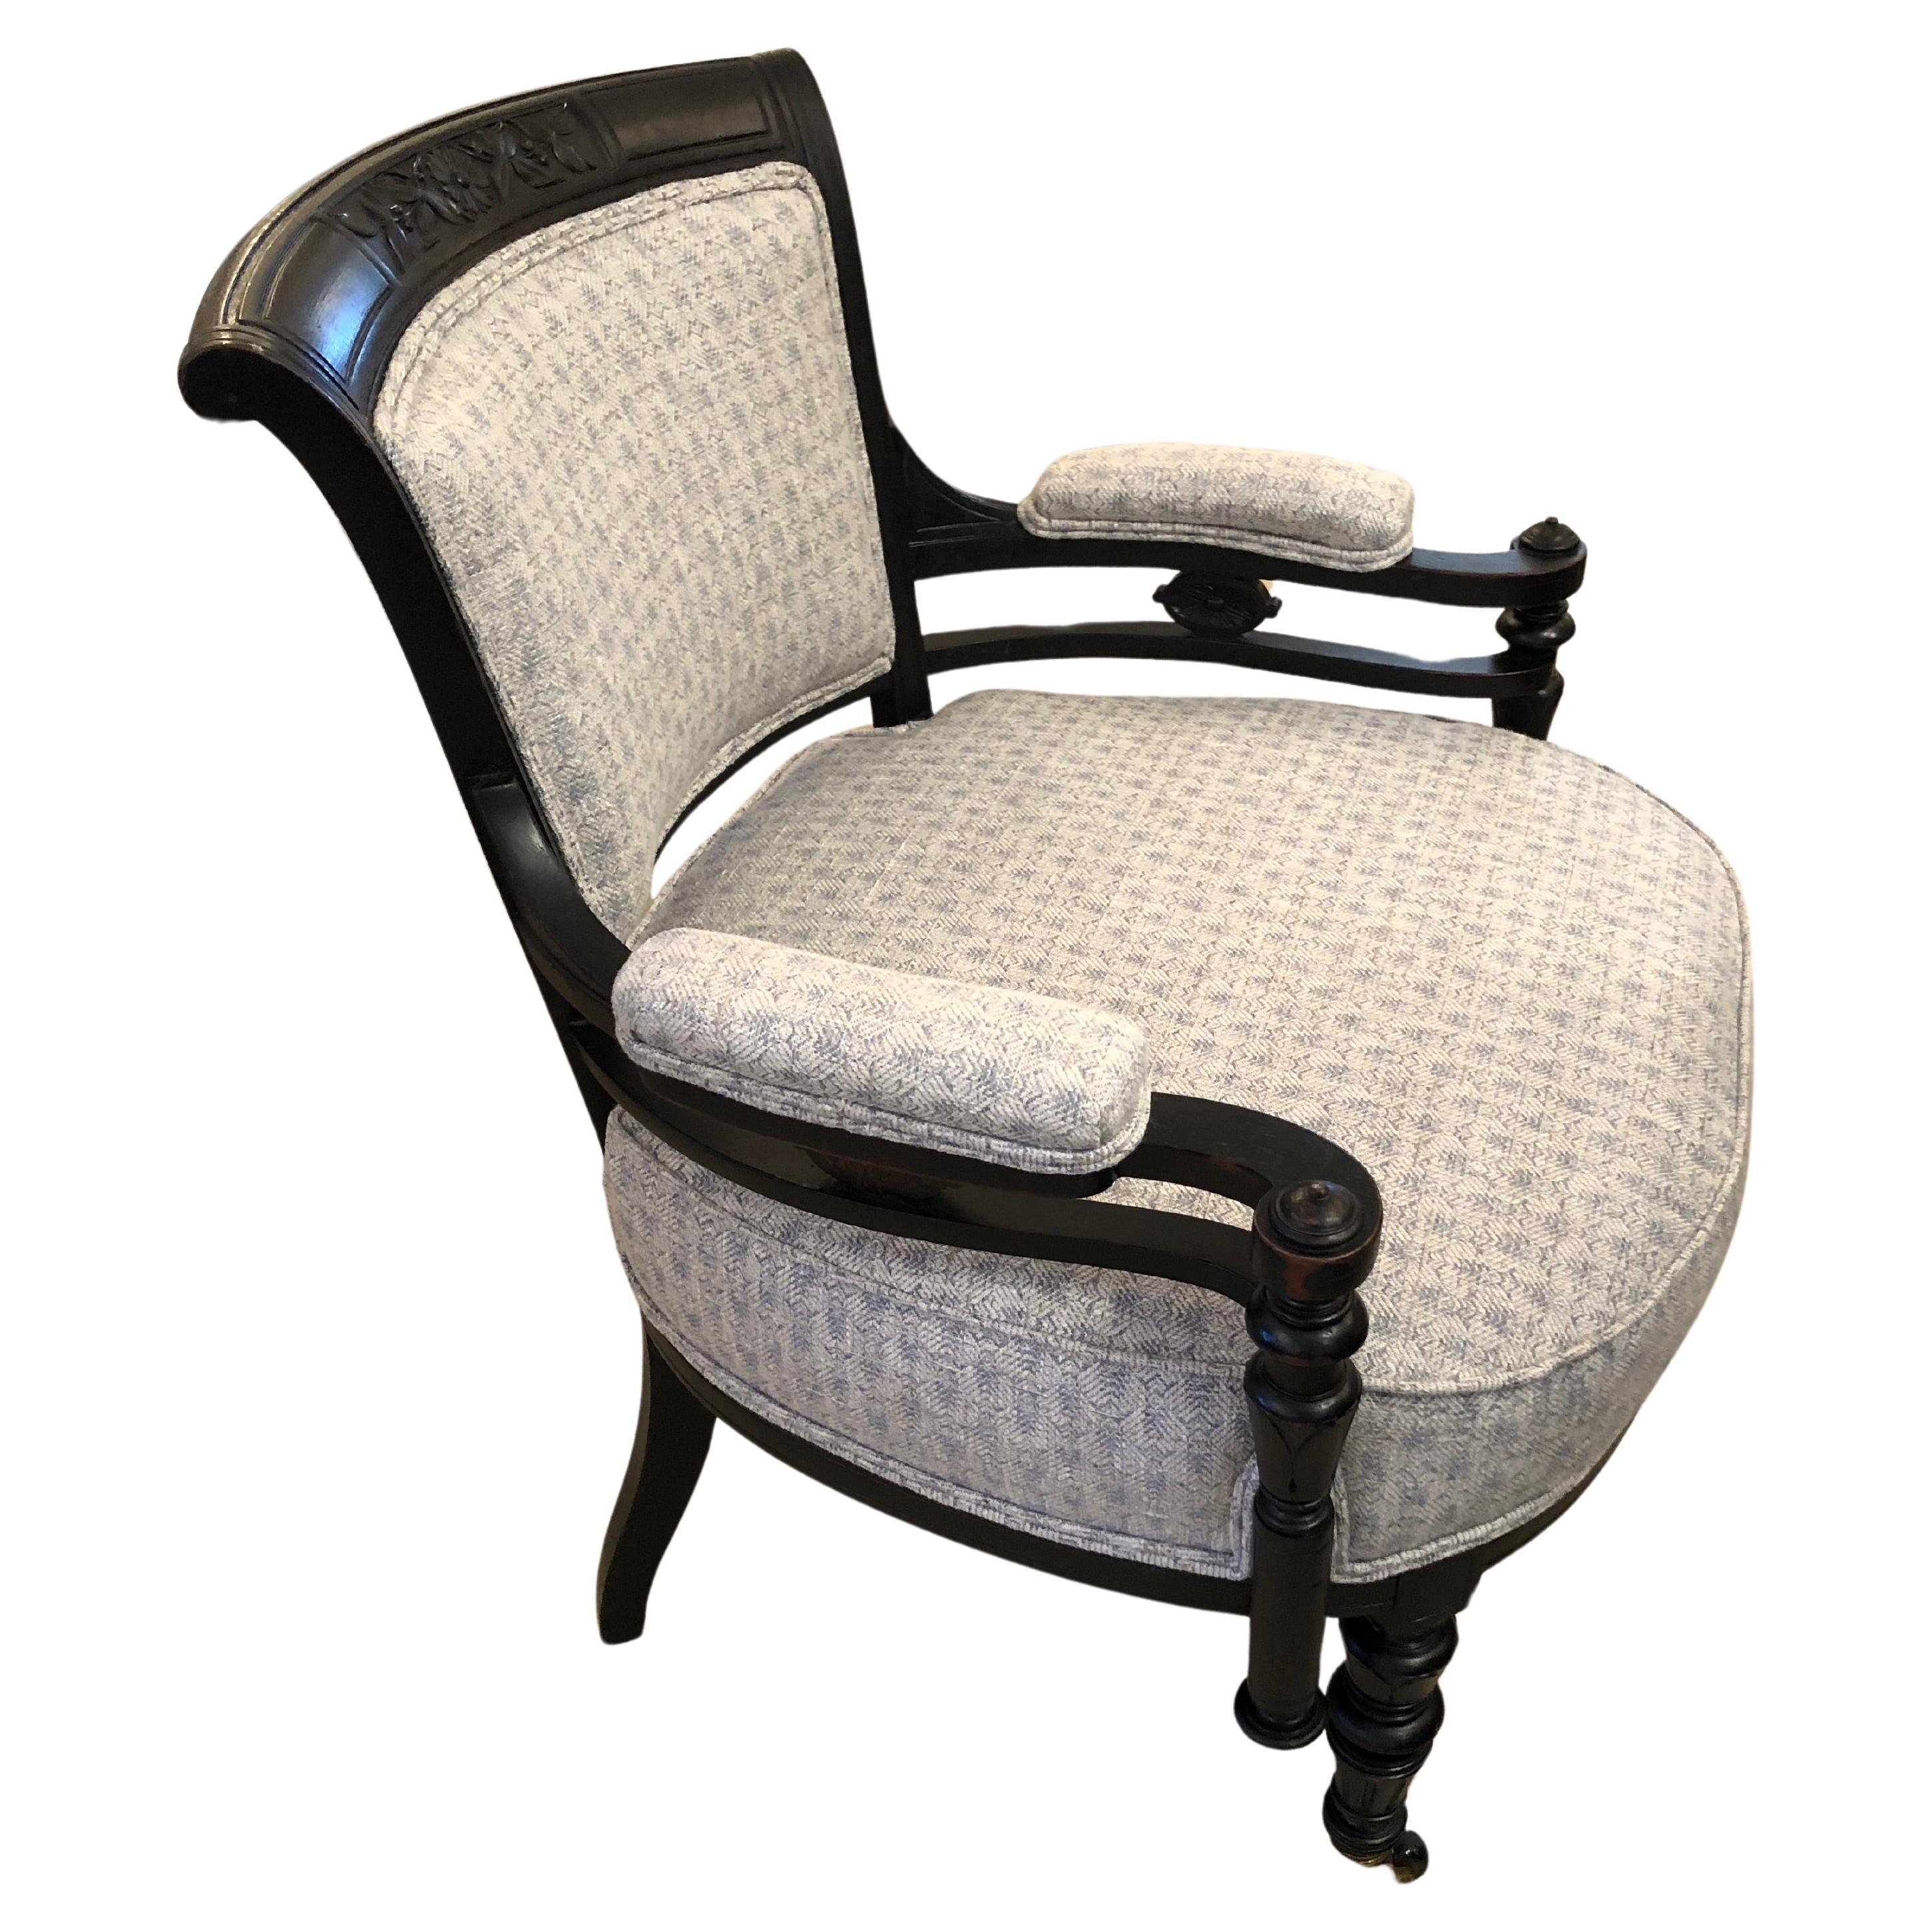 Charming compact curvy ebonized carved wood armchair in decorative Victorian style having flowers carved into the top and fancy turned wood details.  The chair has been beautifully updated and glamorized with new light bluish grey upholstery.  The